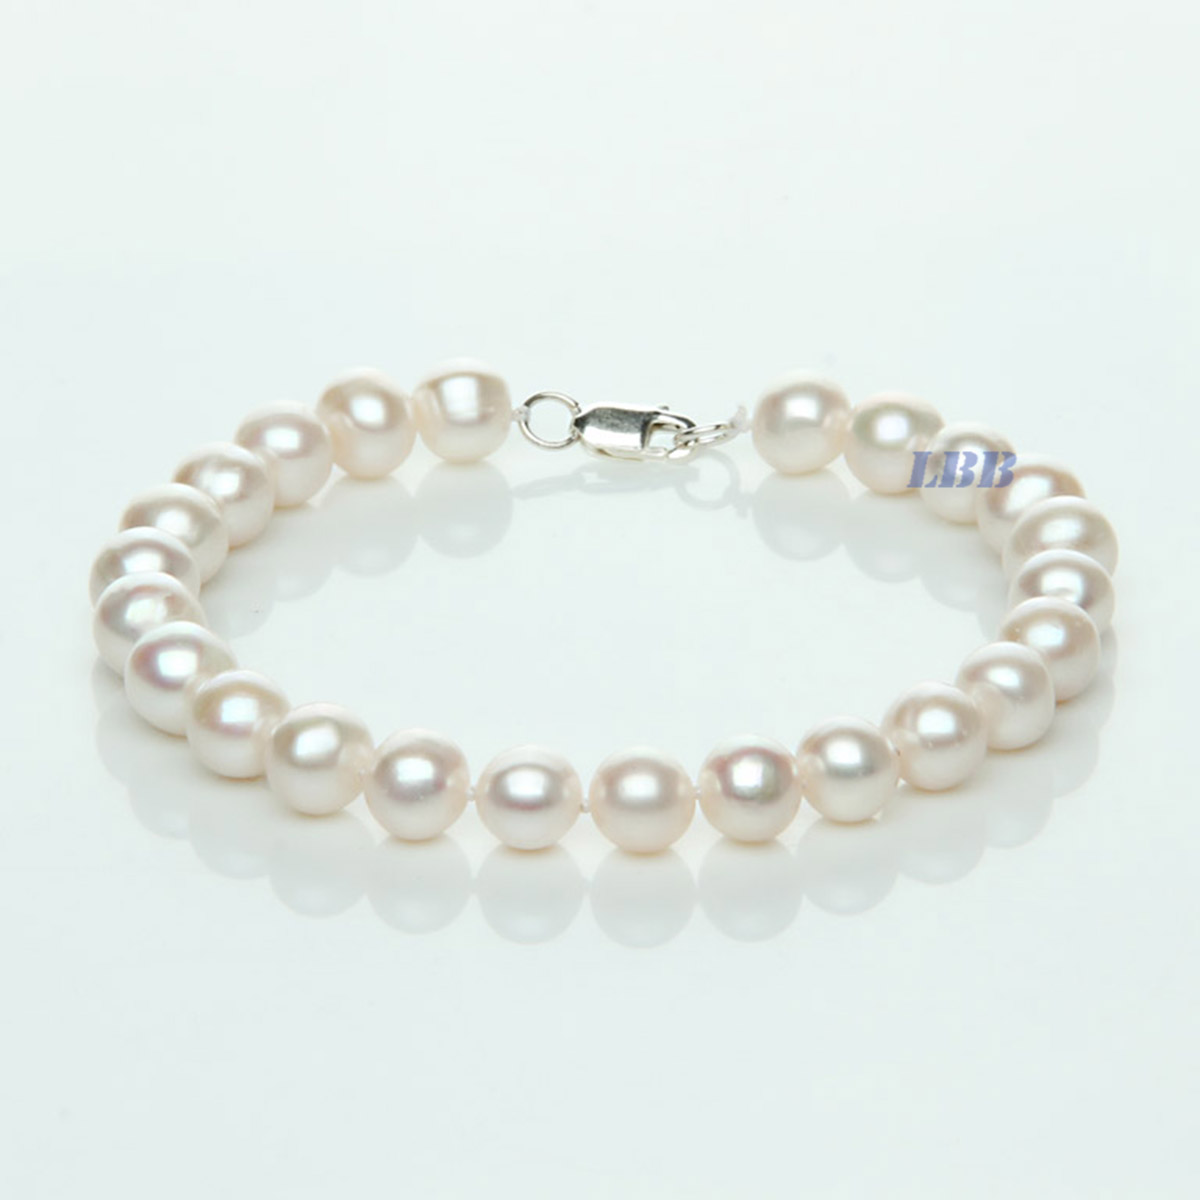 Bracelet Sterling Silver Clasp White Freshwater Pearl